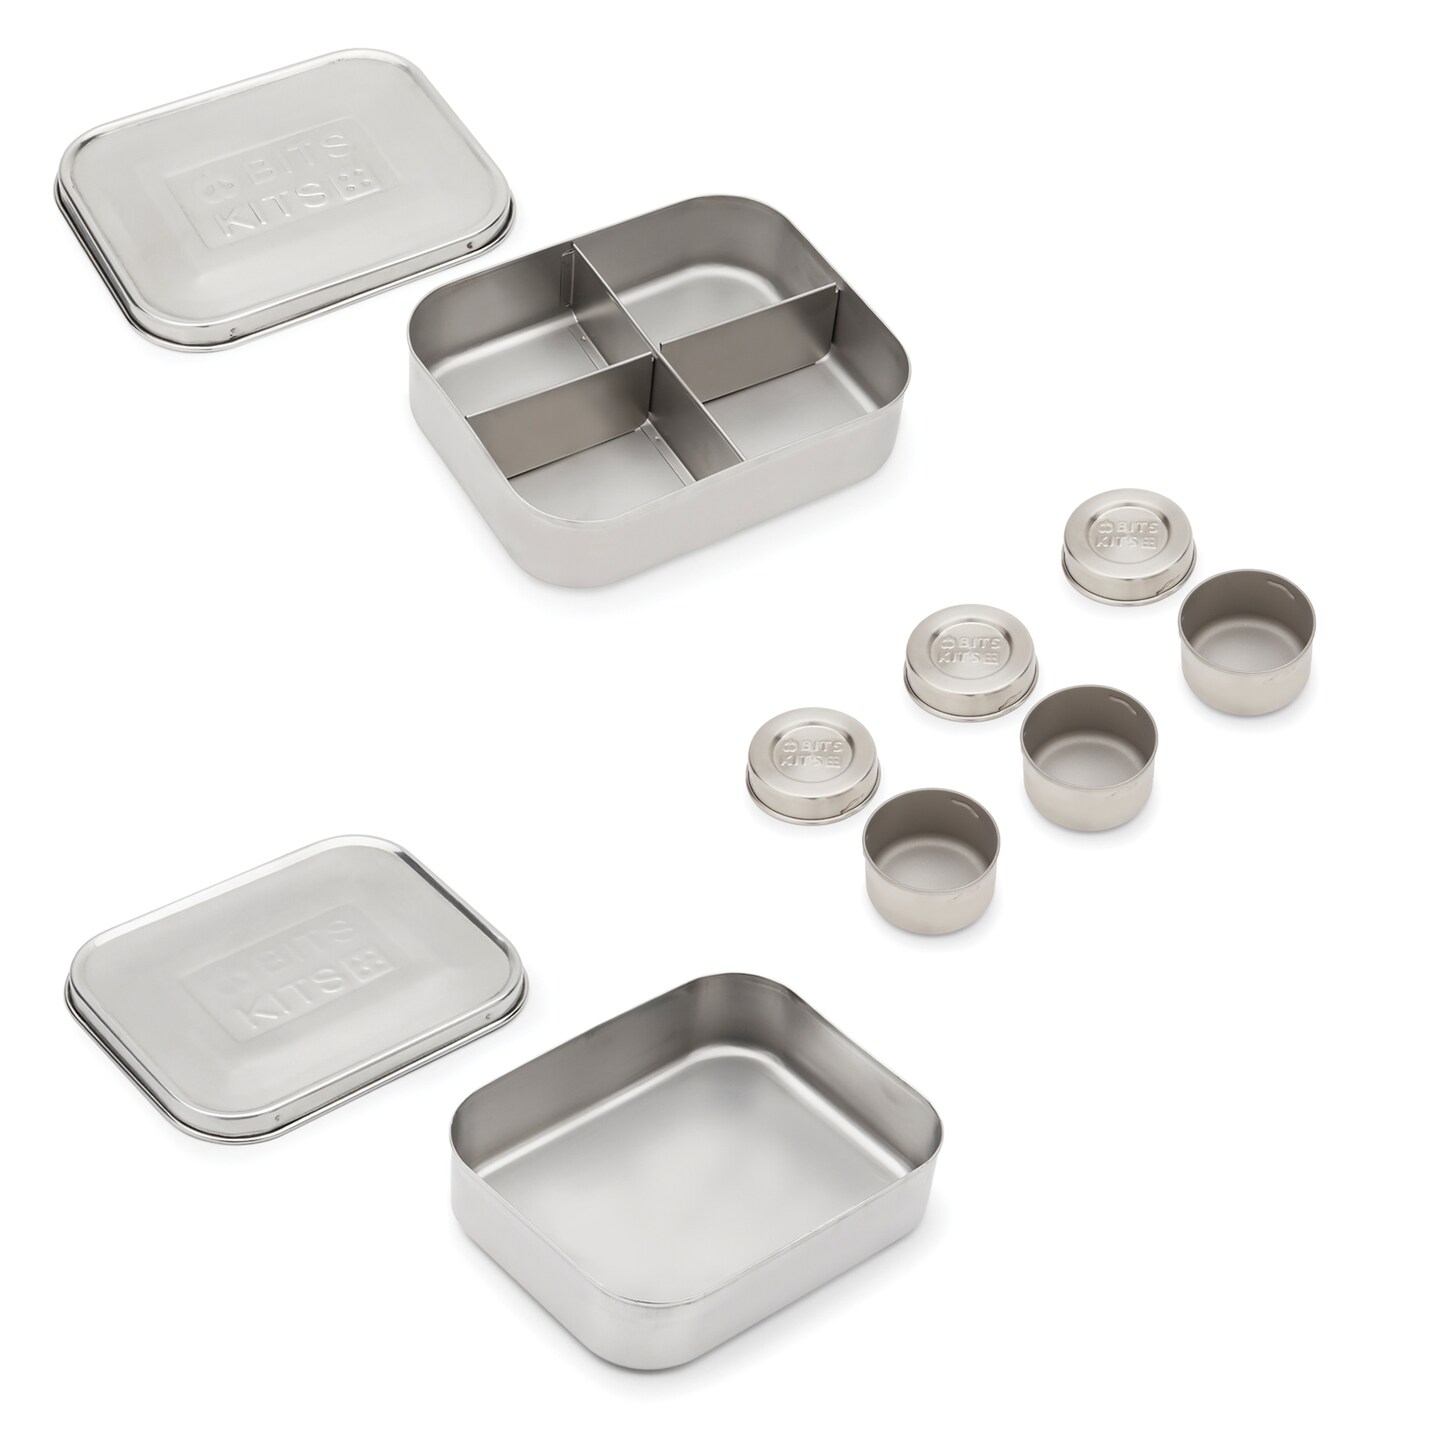 Silver Lunch Box and Condiment Containers Bundle Set of 5